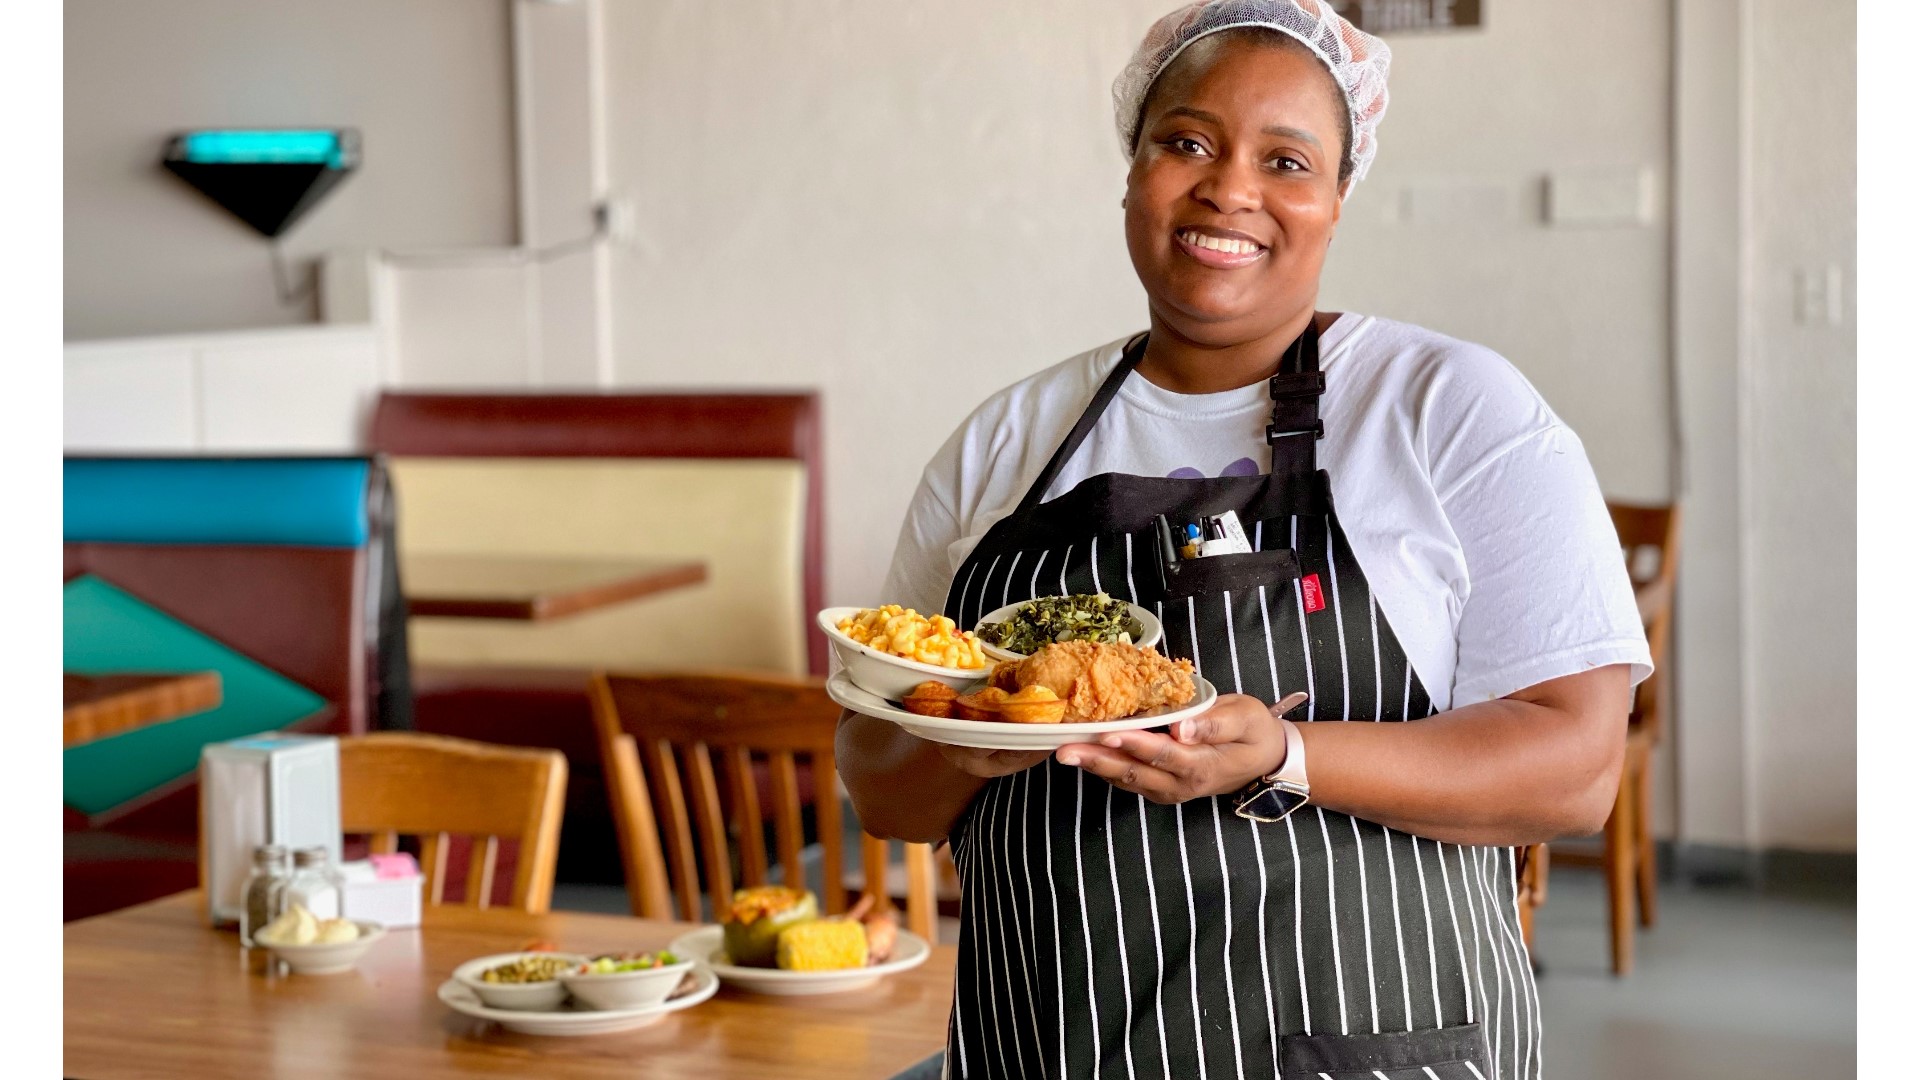 A new soul food restaurant is cooking up some southern gold in Warner Robins.